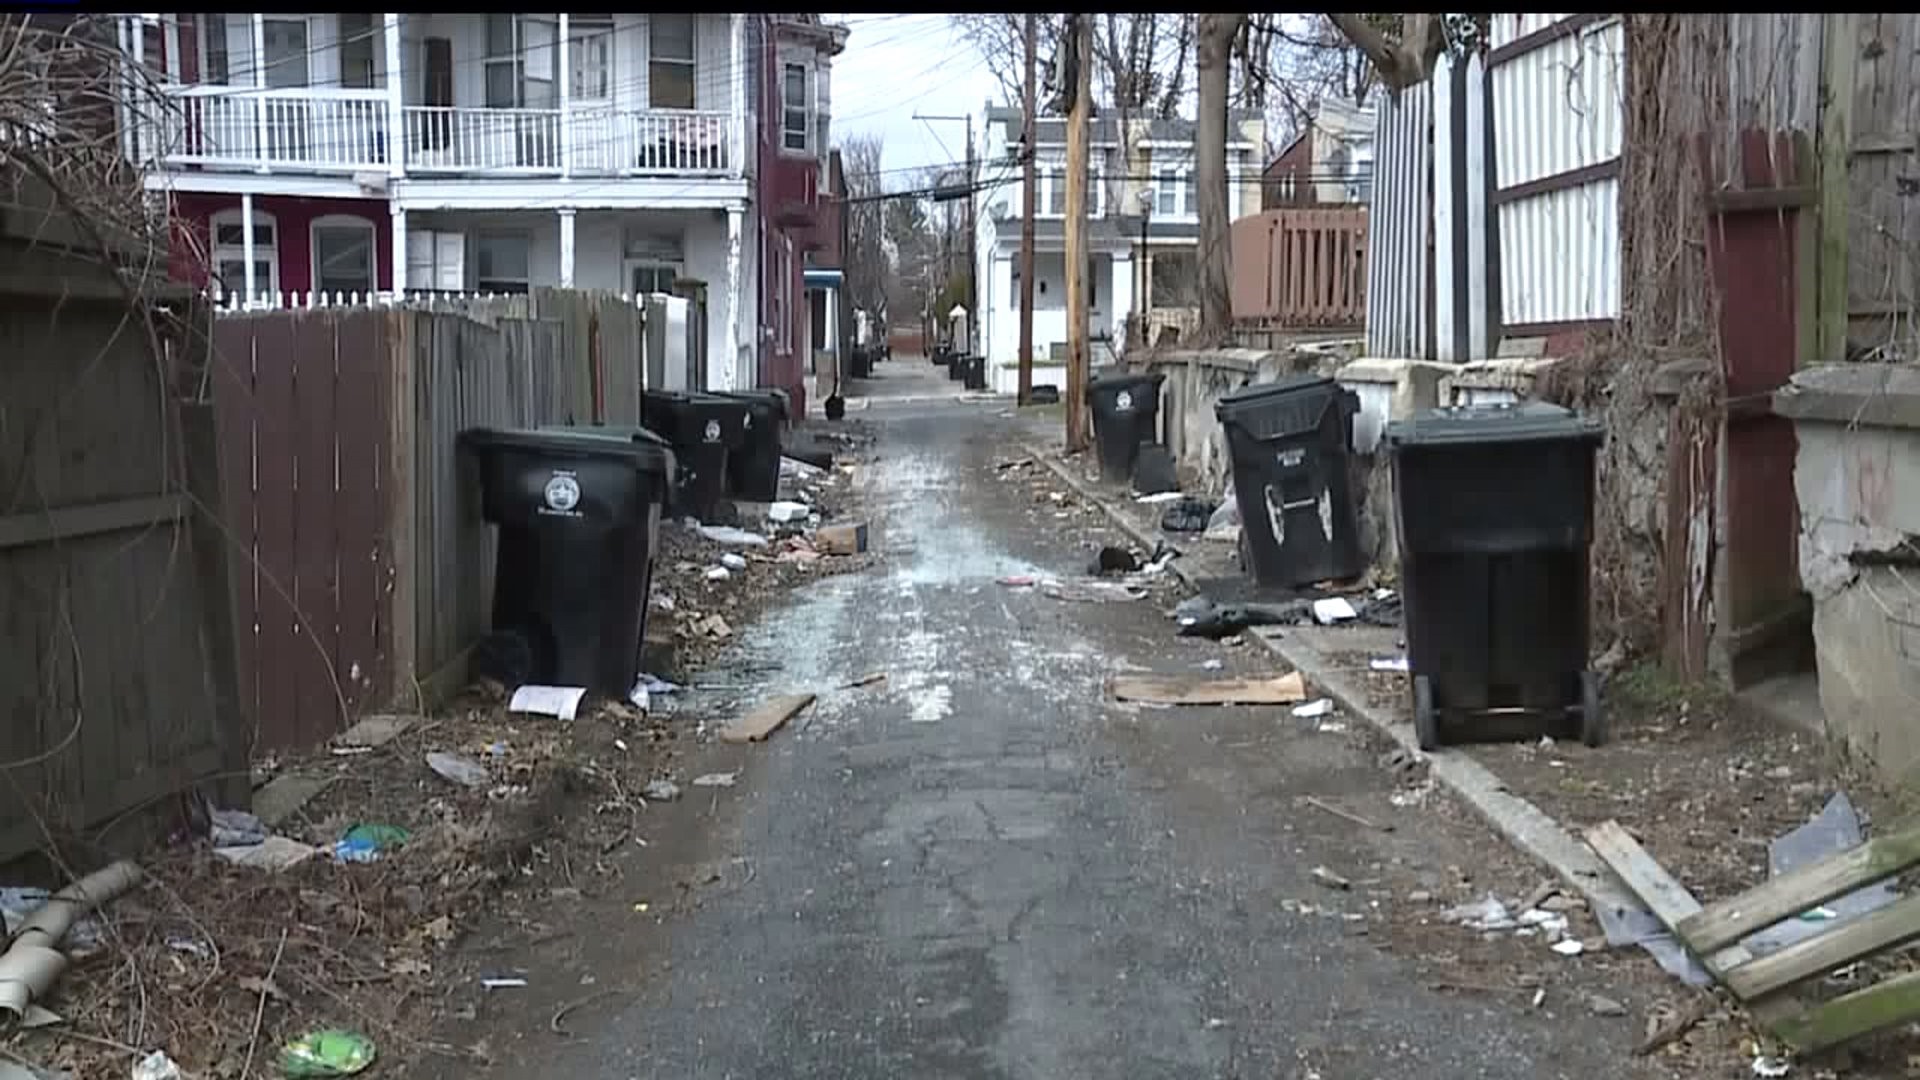 Harrisburg public works officials want stricter ordinance against illegal dumping